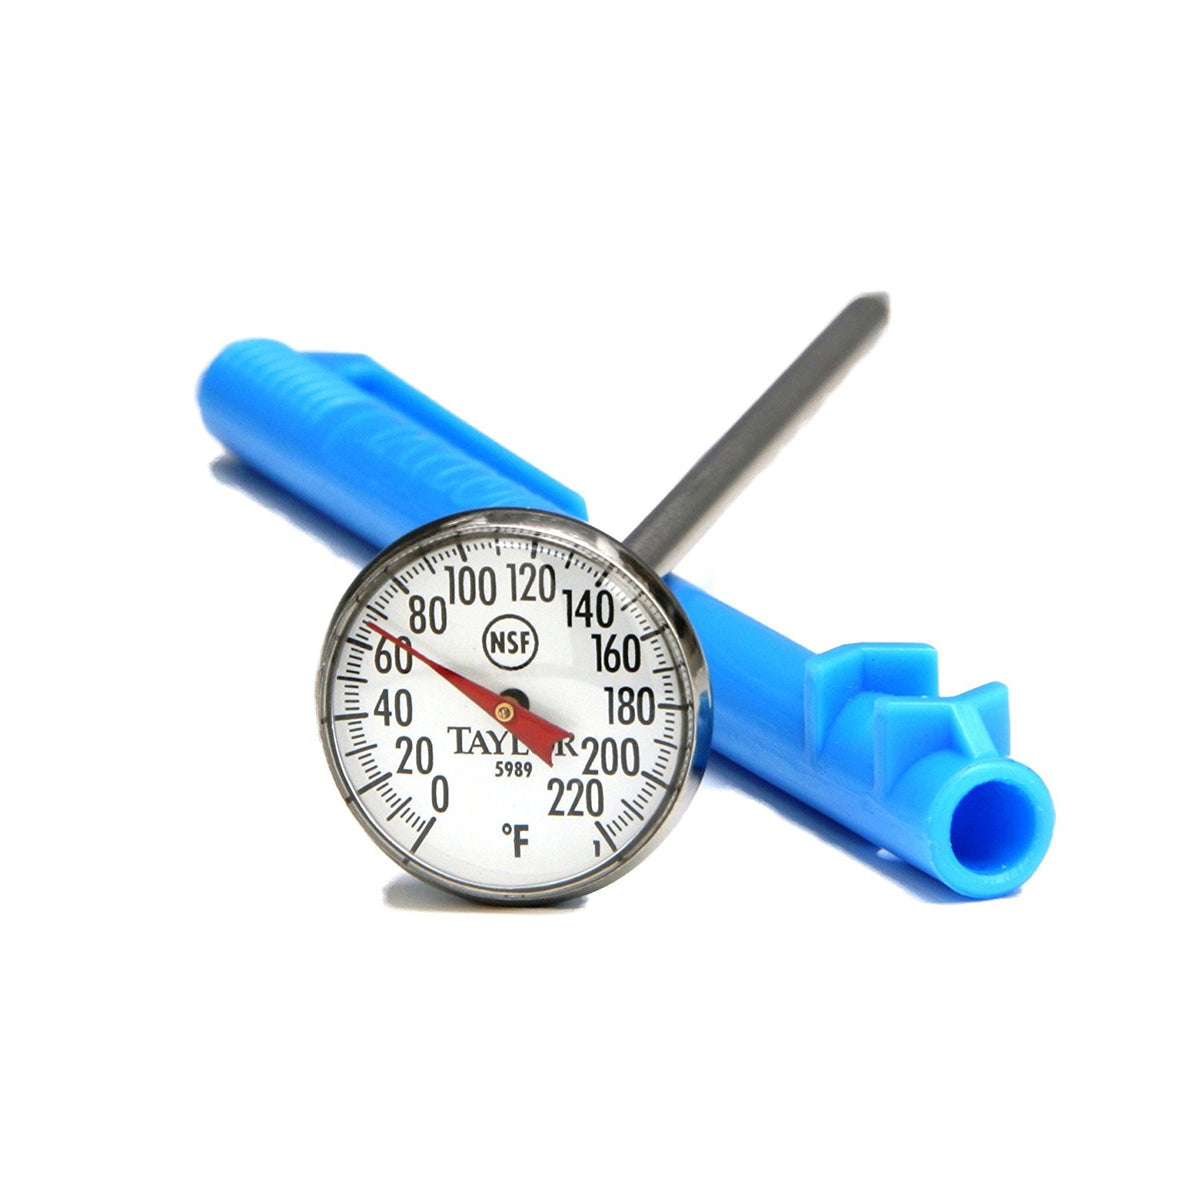 Taylor 1 Dial Stainless Pocket Thermometers - Bunzl Processor Division